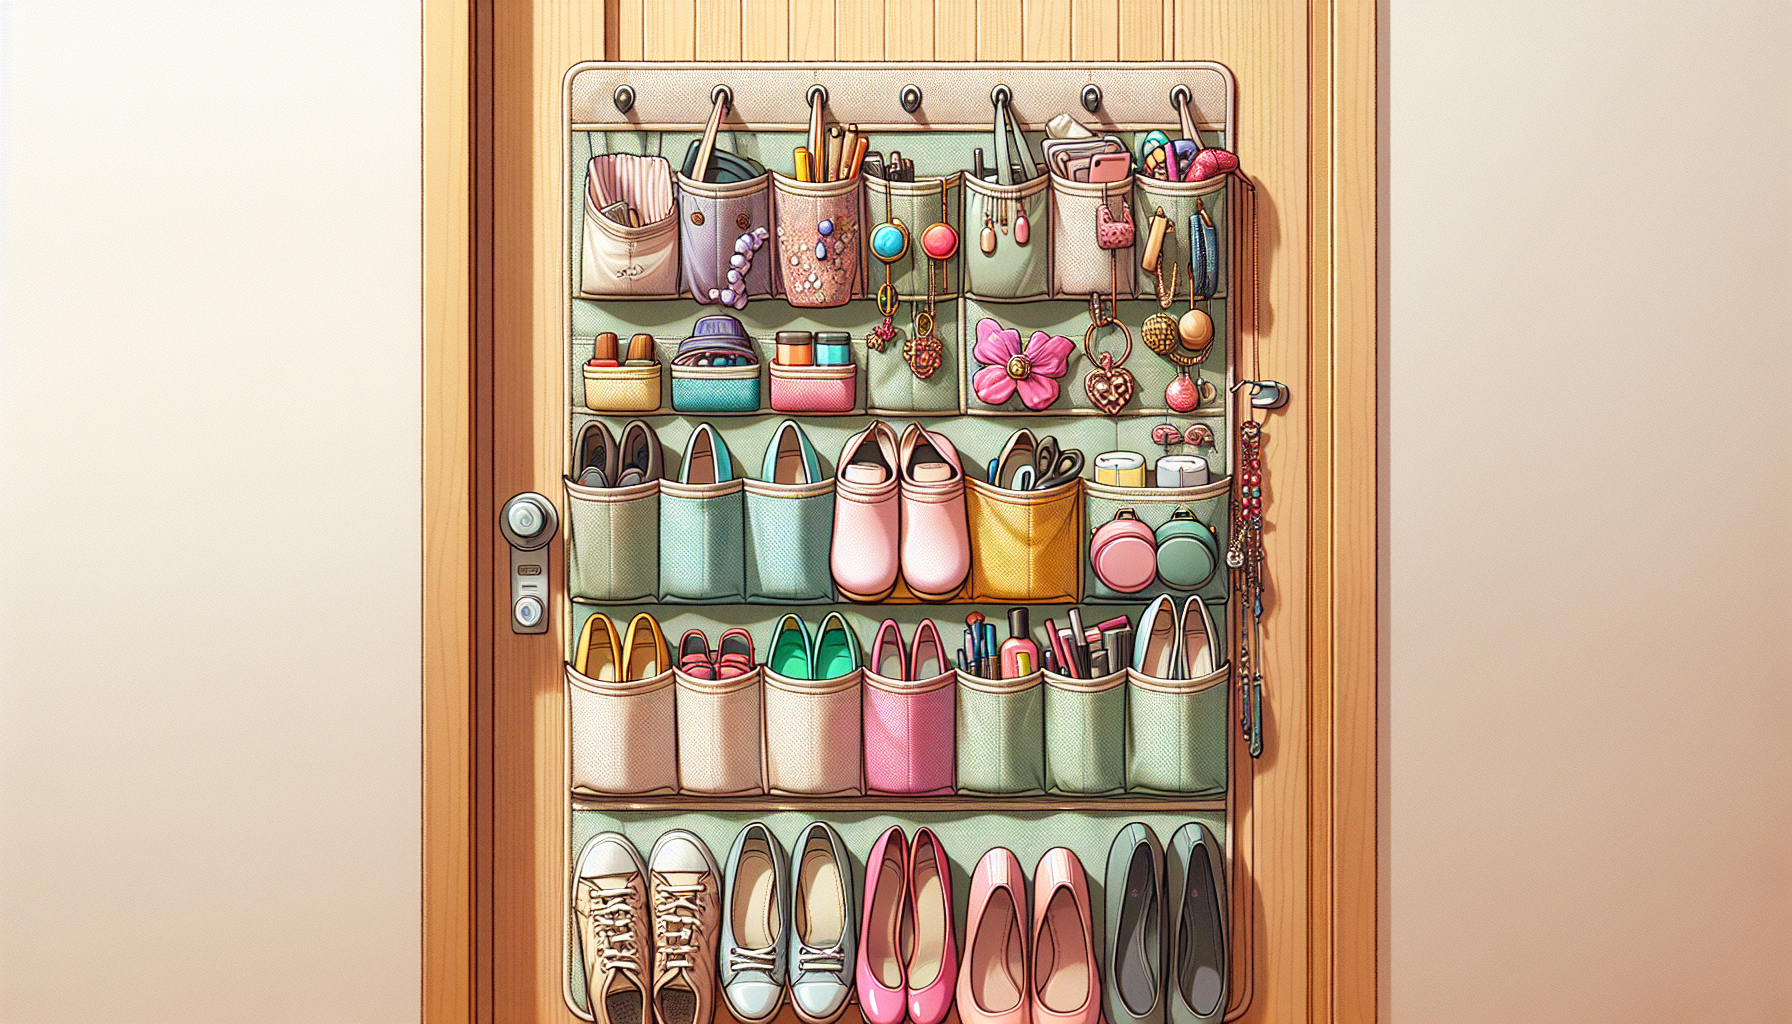 Illustration of over-the-door organisers for small bedroom storage